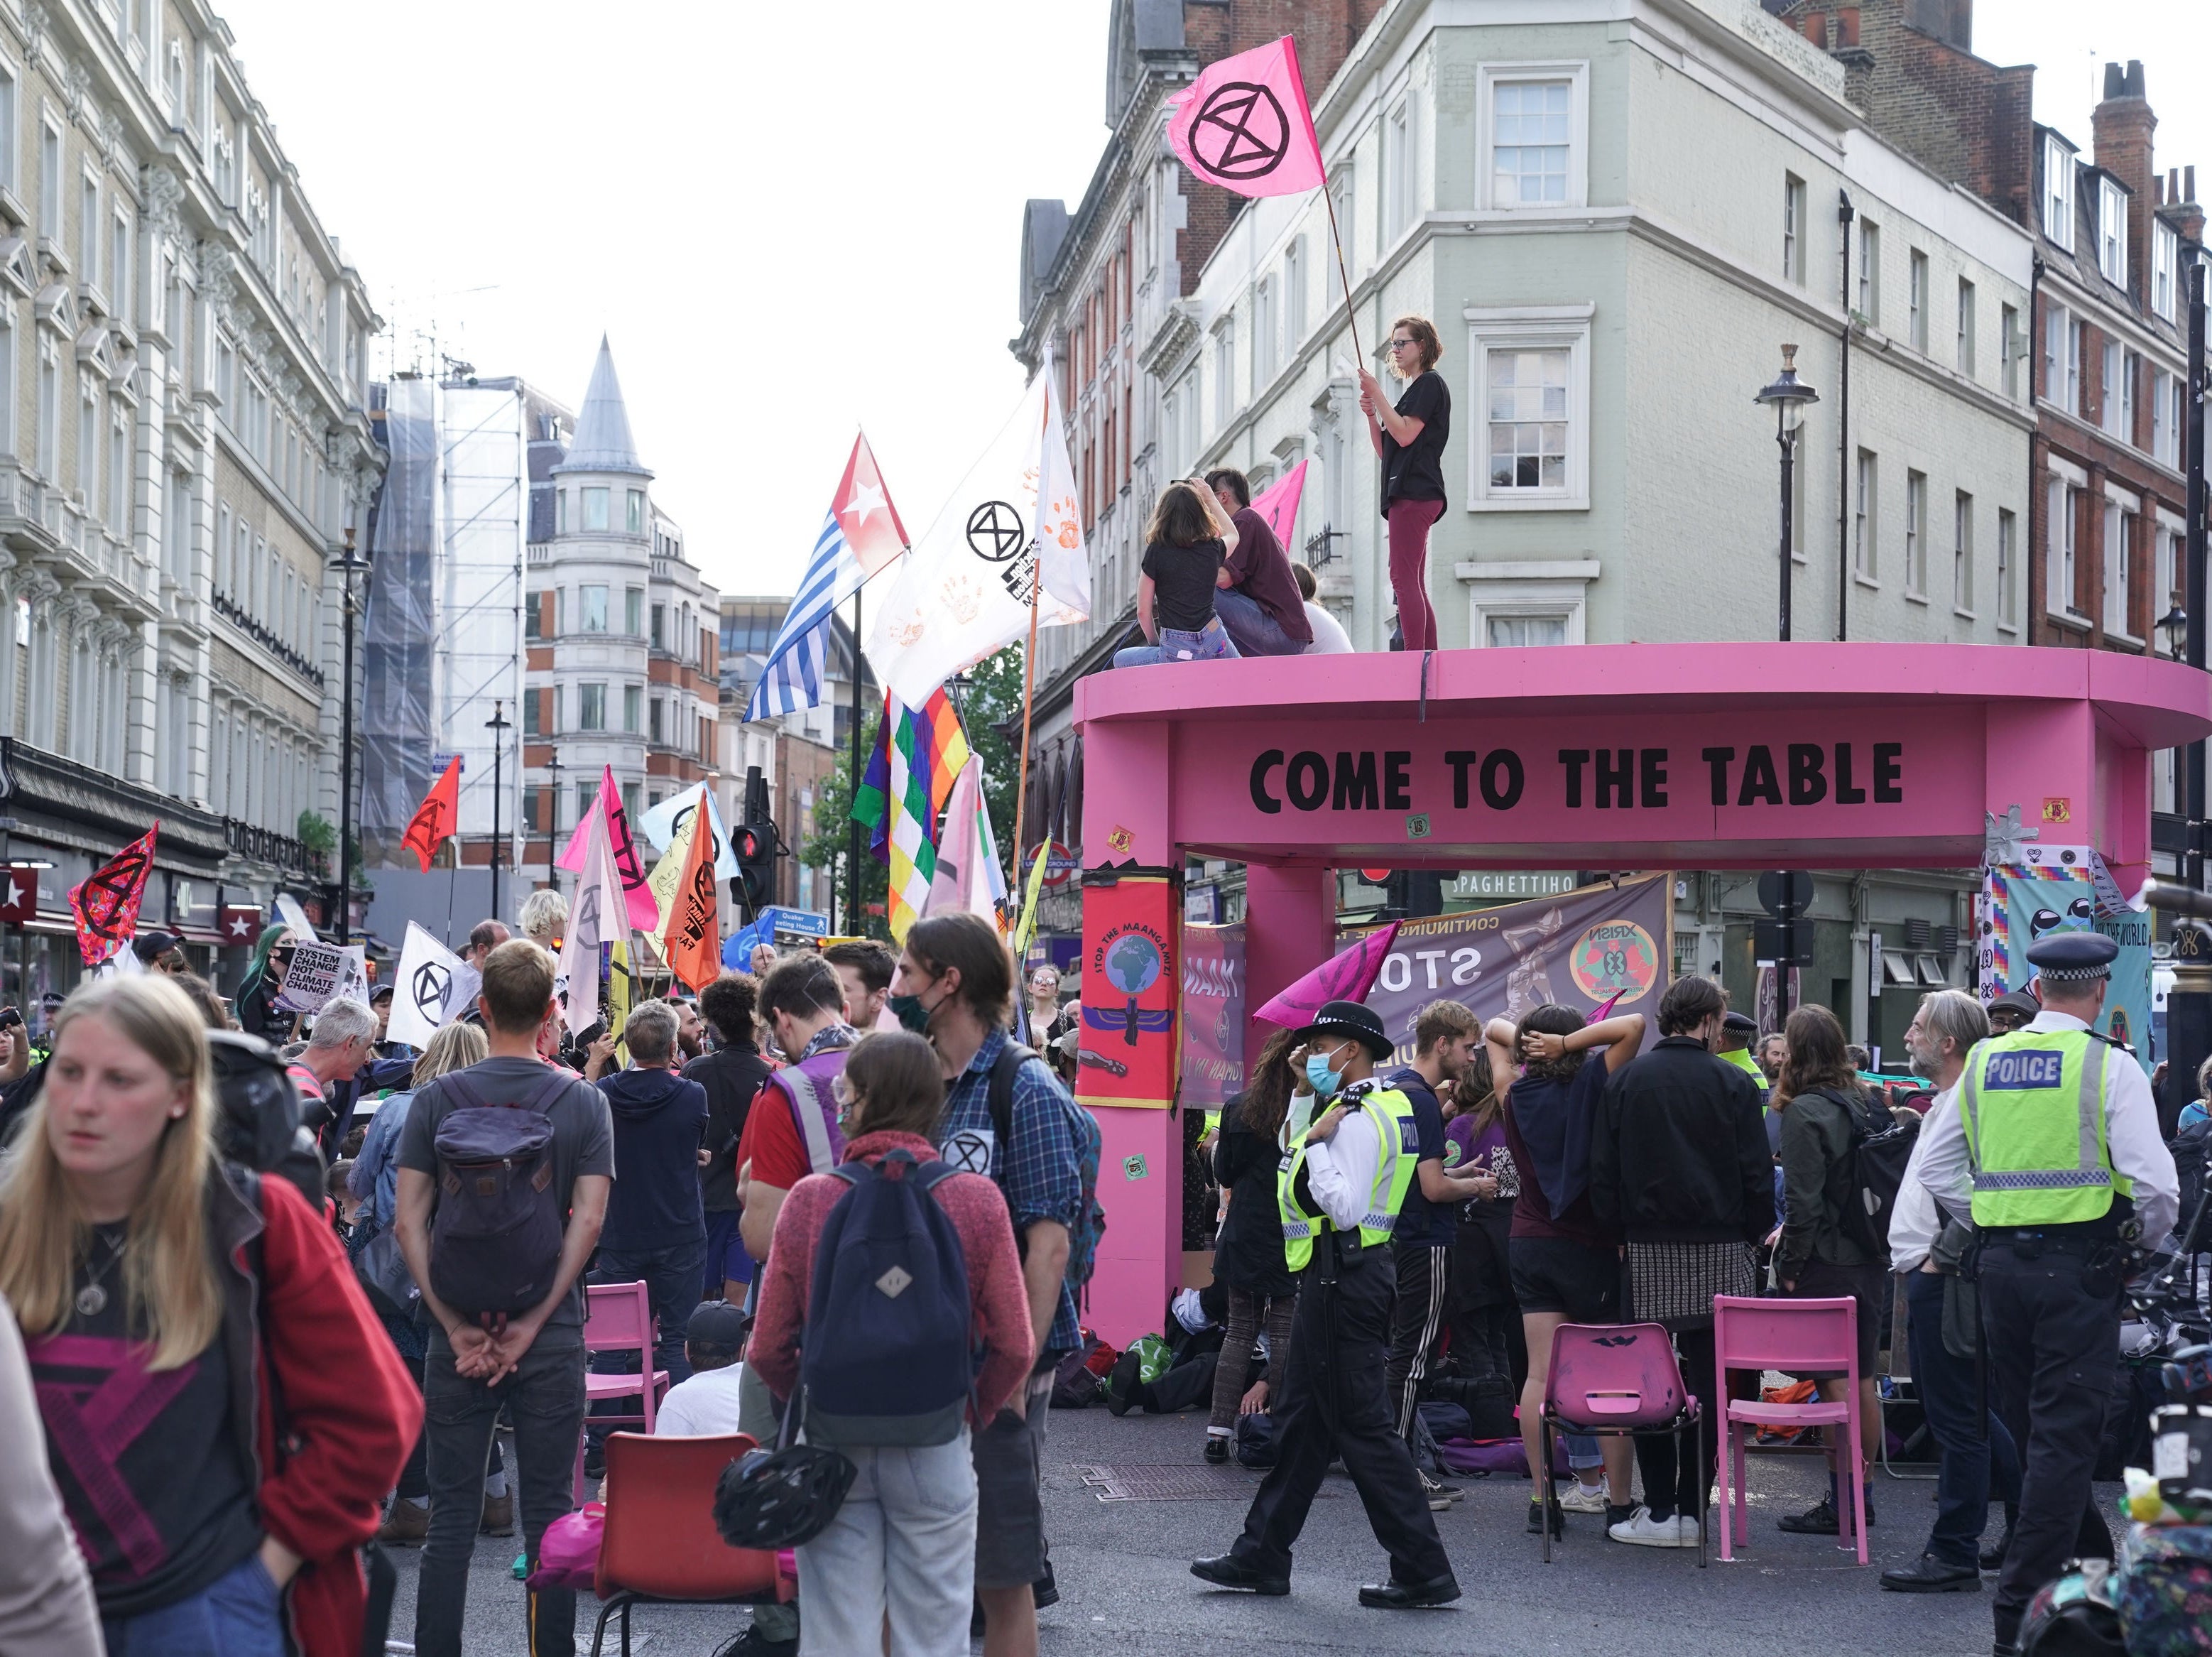 An Extinction Rebellion protest in London in August 2021